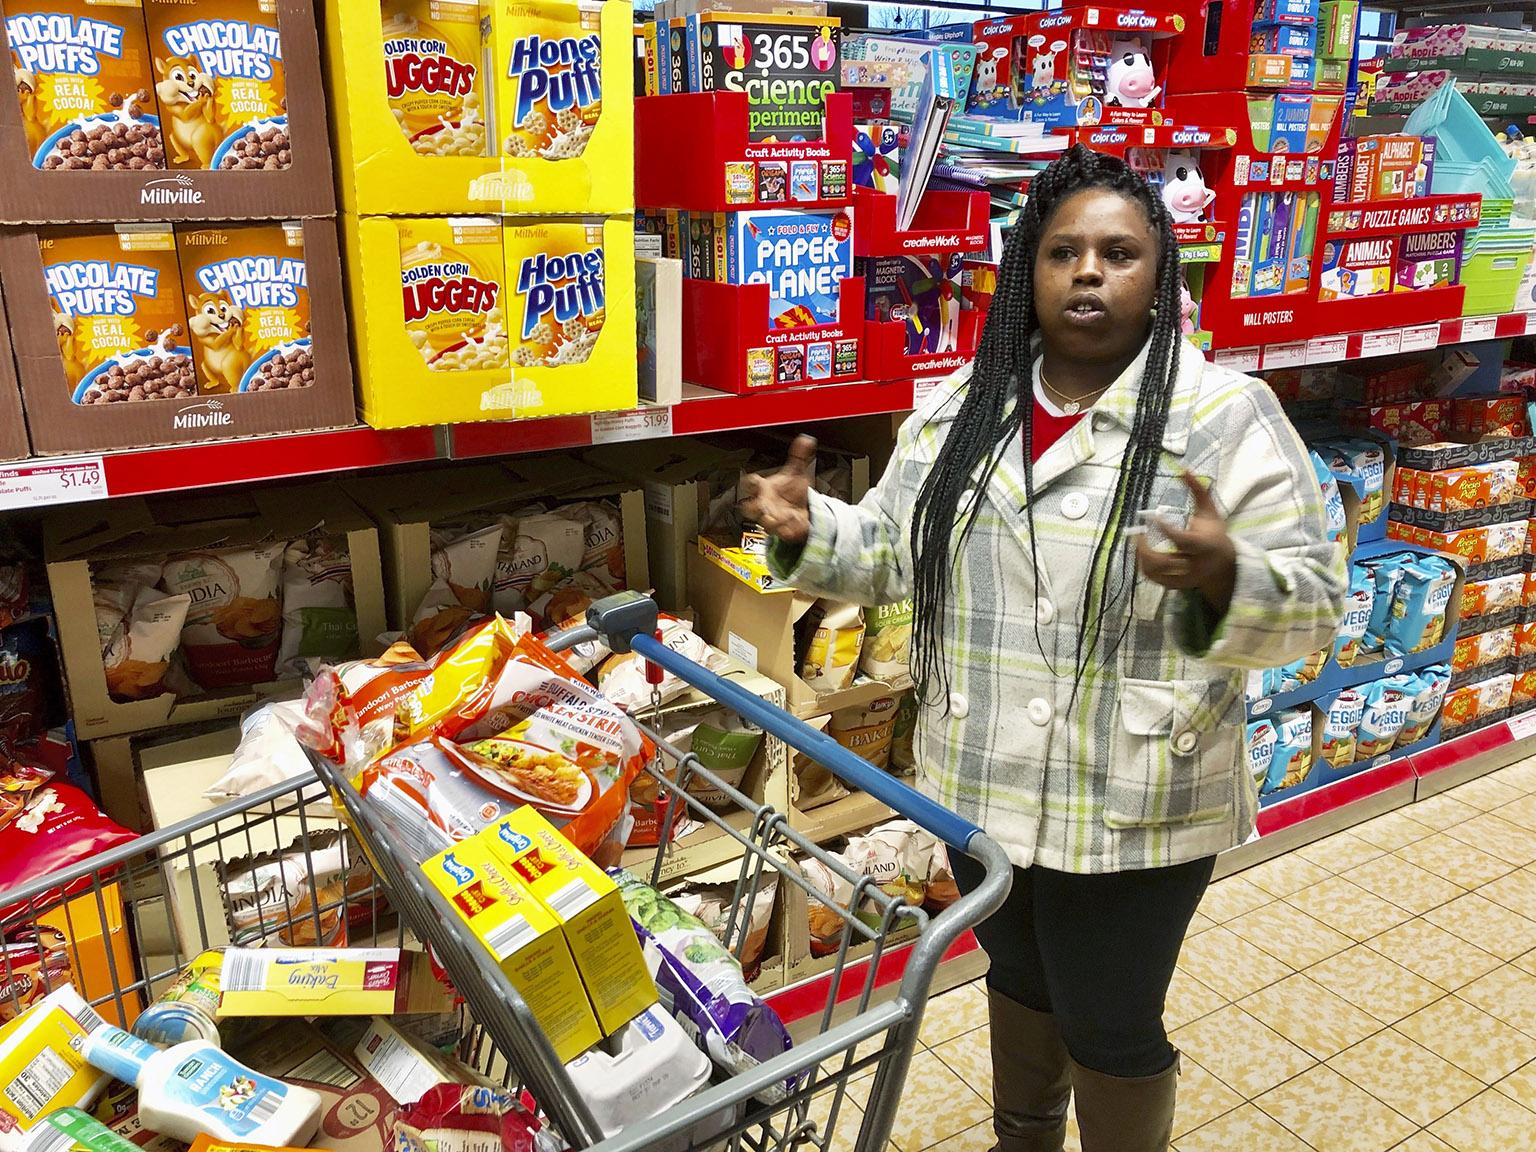 In this Sunday, Feb. 10, 2019 photo, Laquesha Russell, a 36-year-old home health care worker who makes $10.78 an hour, speaks during an interview as she shops for groceries for her four children in Springfield, Illinois. (AP Photo / John O’Connor)